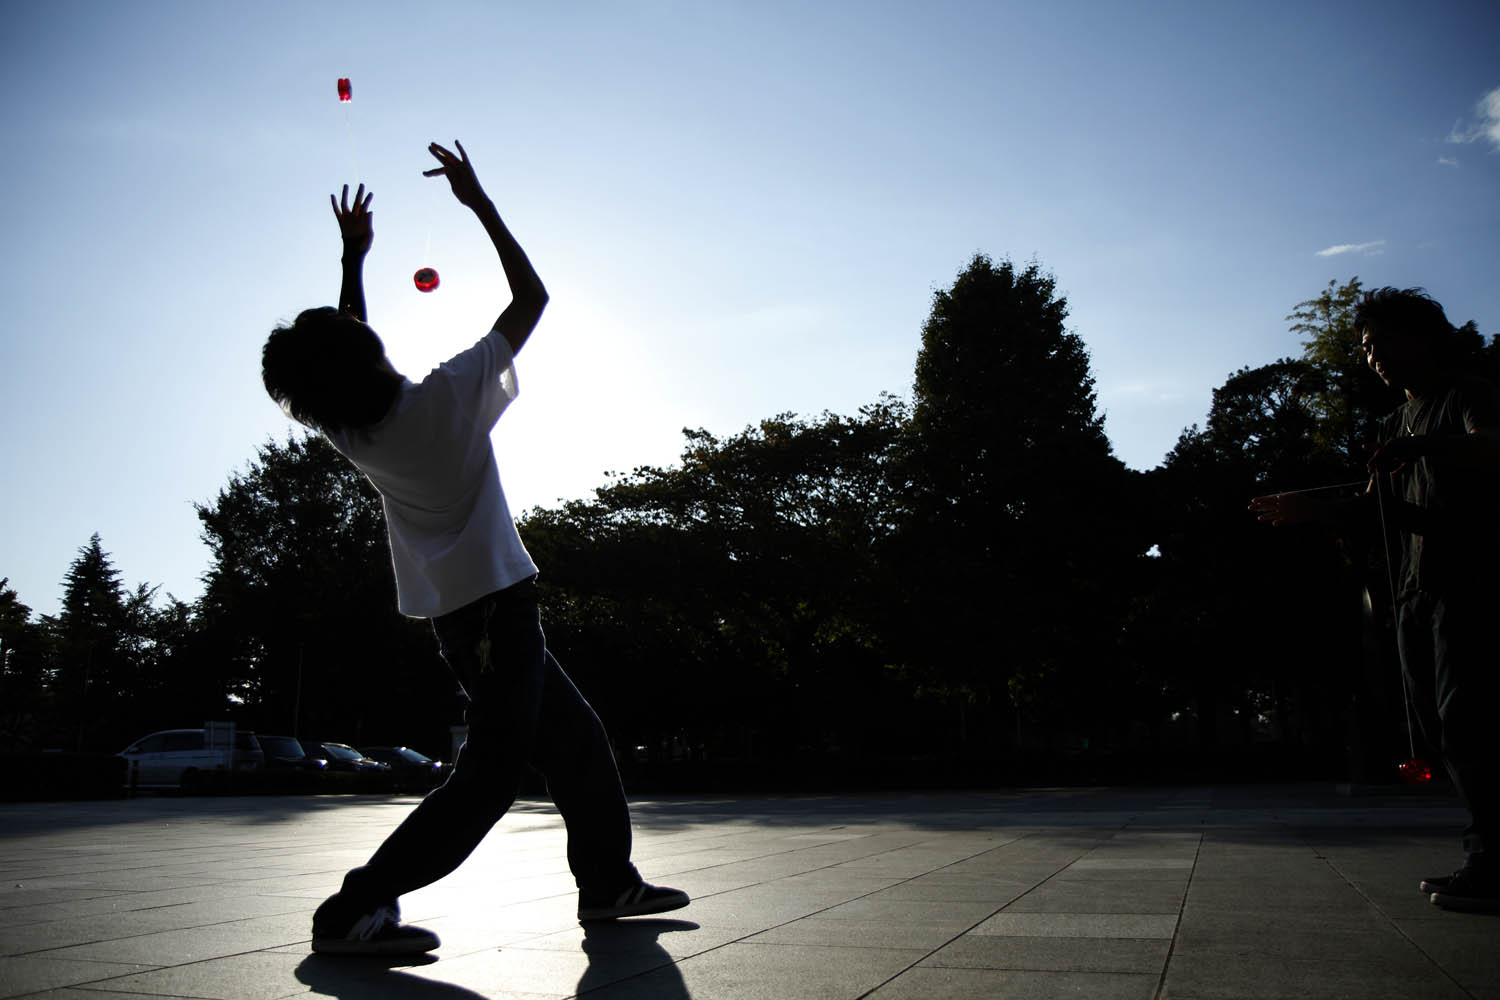  Where do some of the best yo-yoers go to practice? Apparently they go to a park just outside of Tokyo. Here former world yo-yo champion Takumi Nagase practices in a park in Kawaguchi, Japan, using two yo-yos, his specialty. 